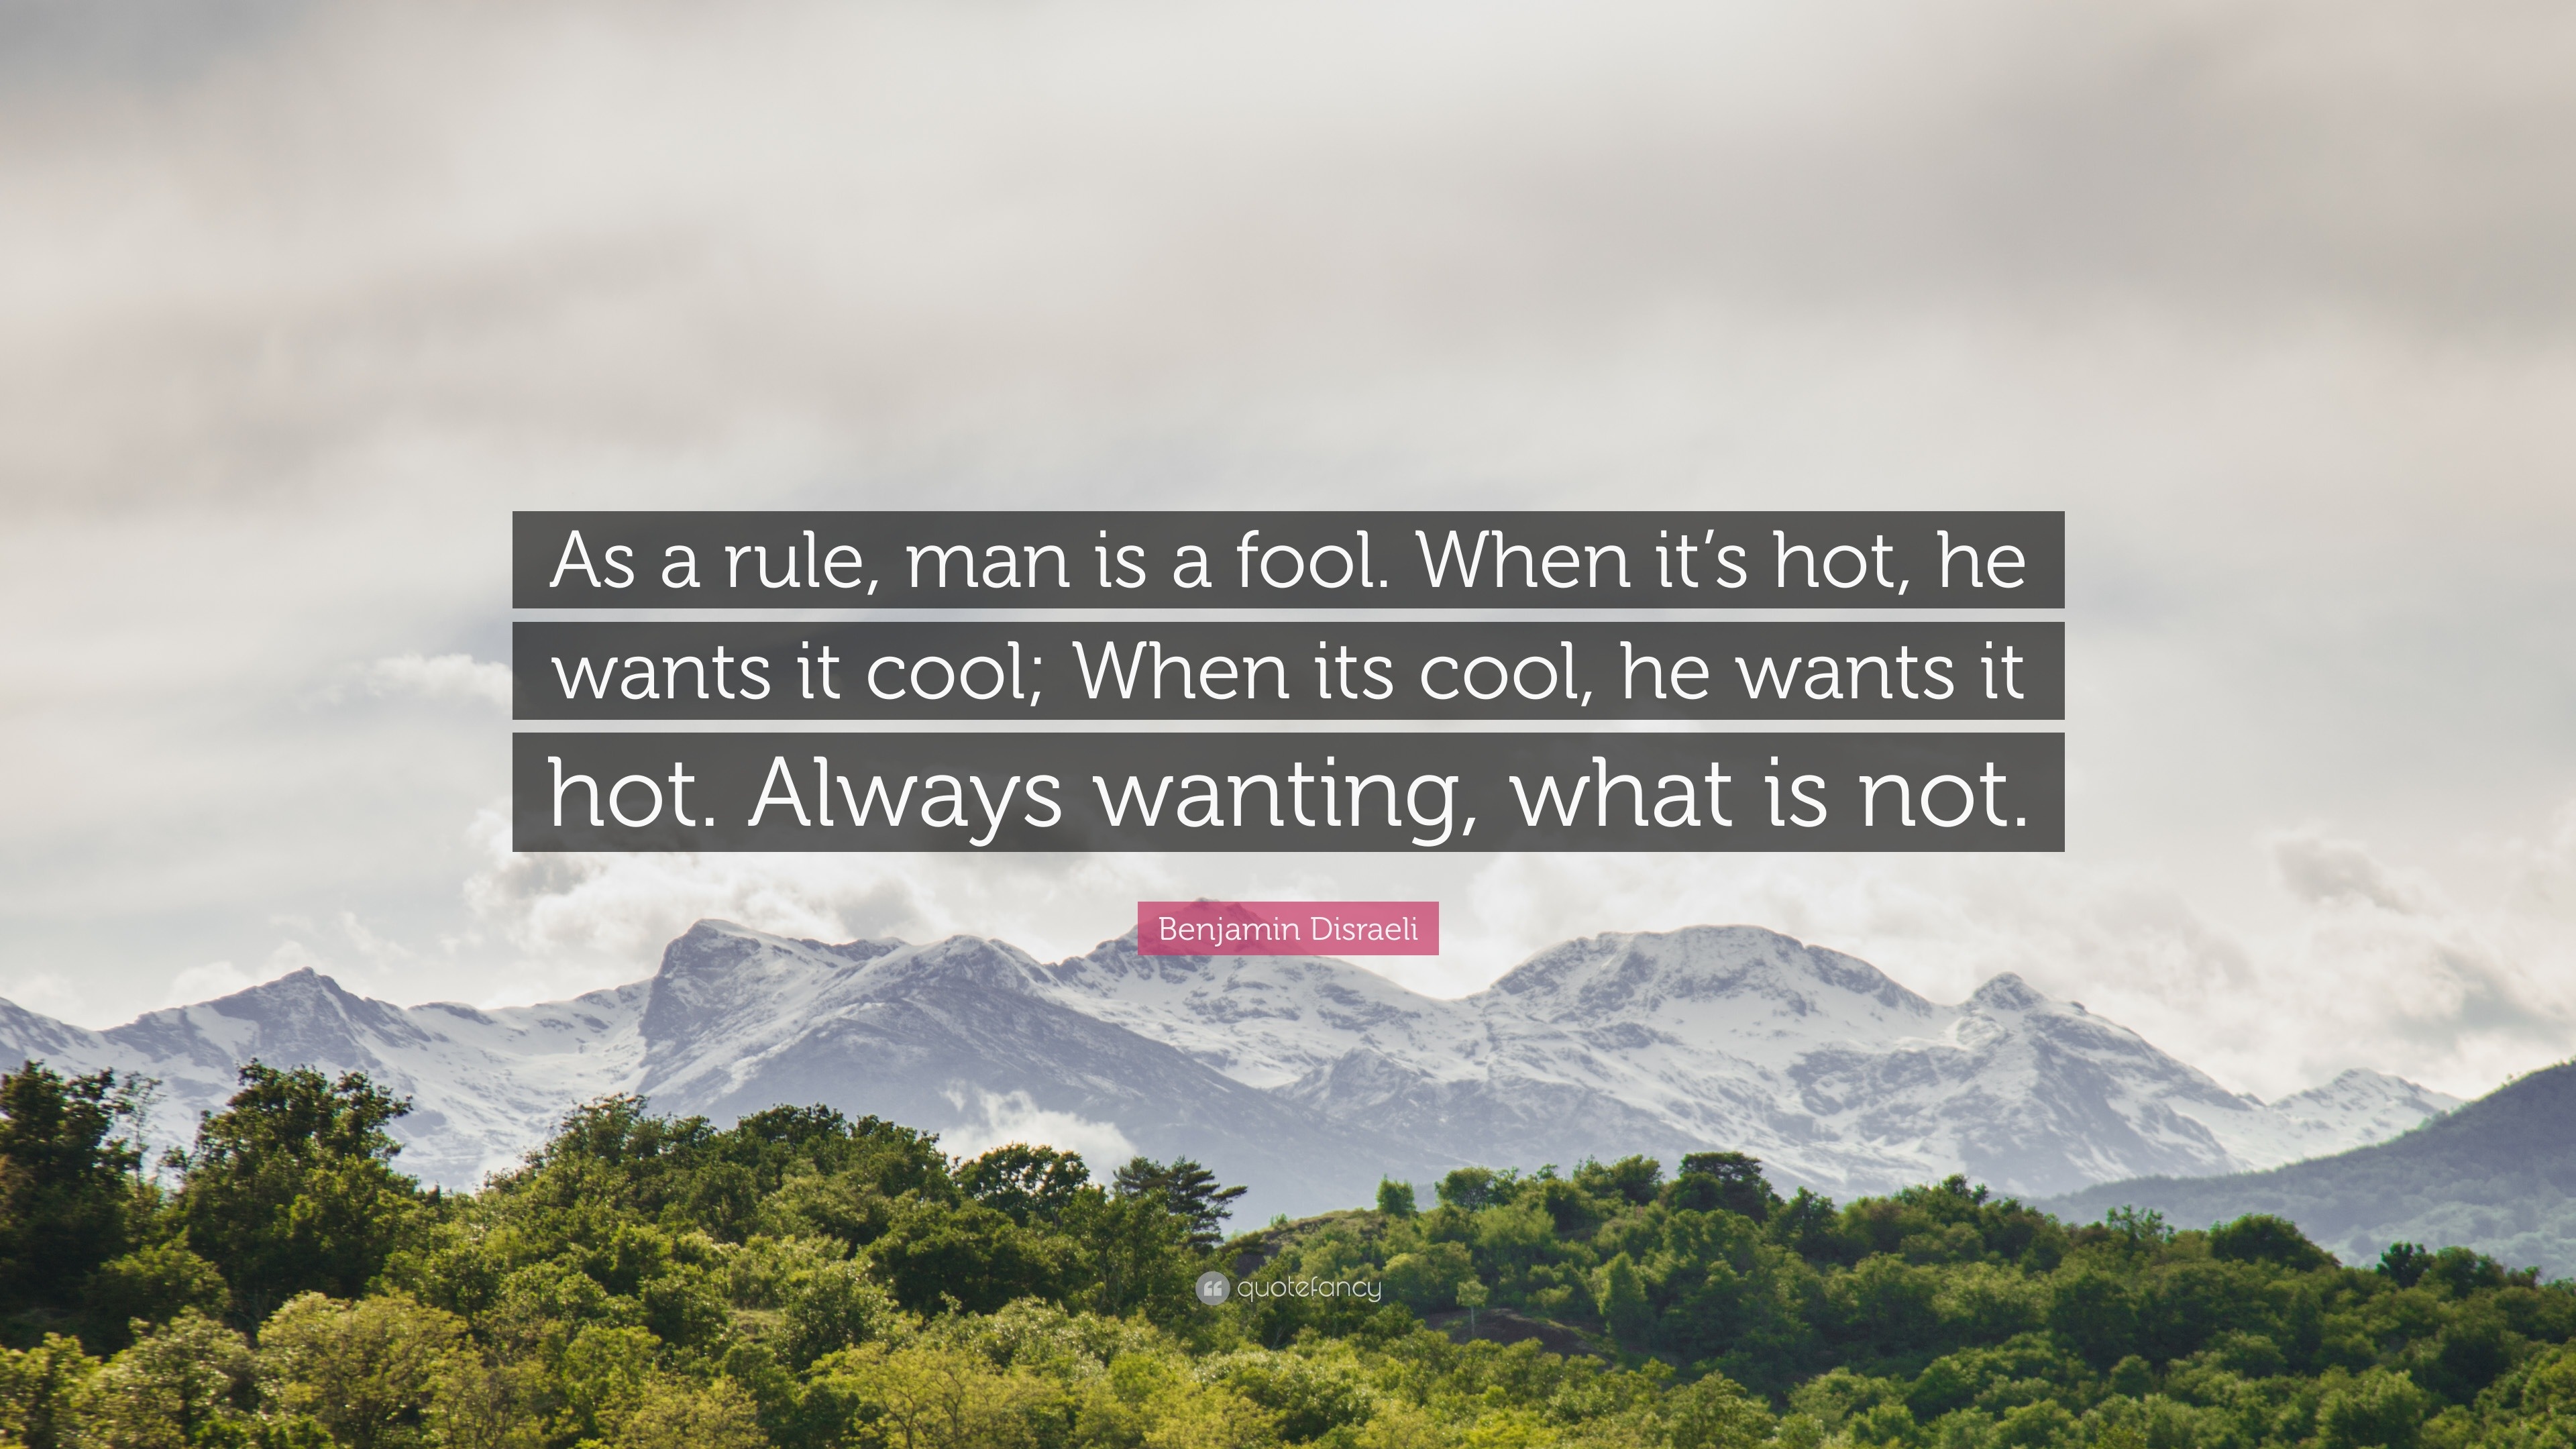 Benjamin Disraeli Quote: “As a rule, man is a fool. When it's hot